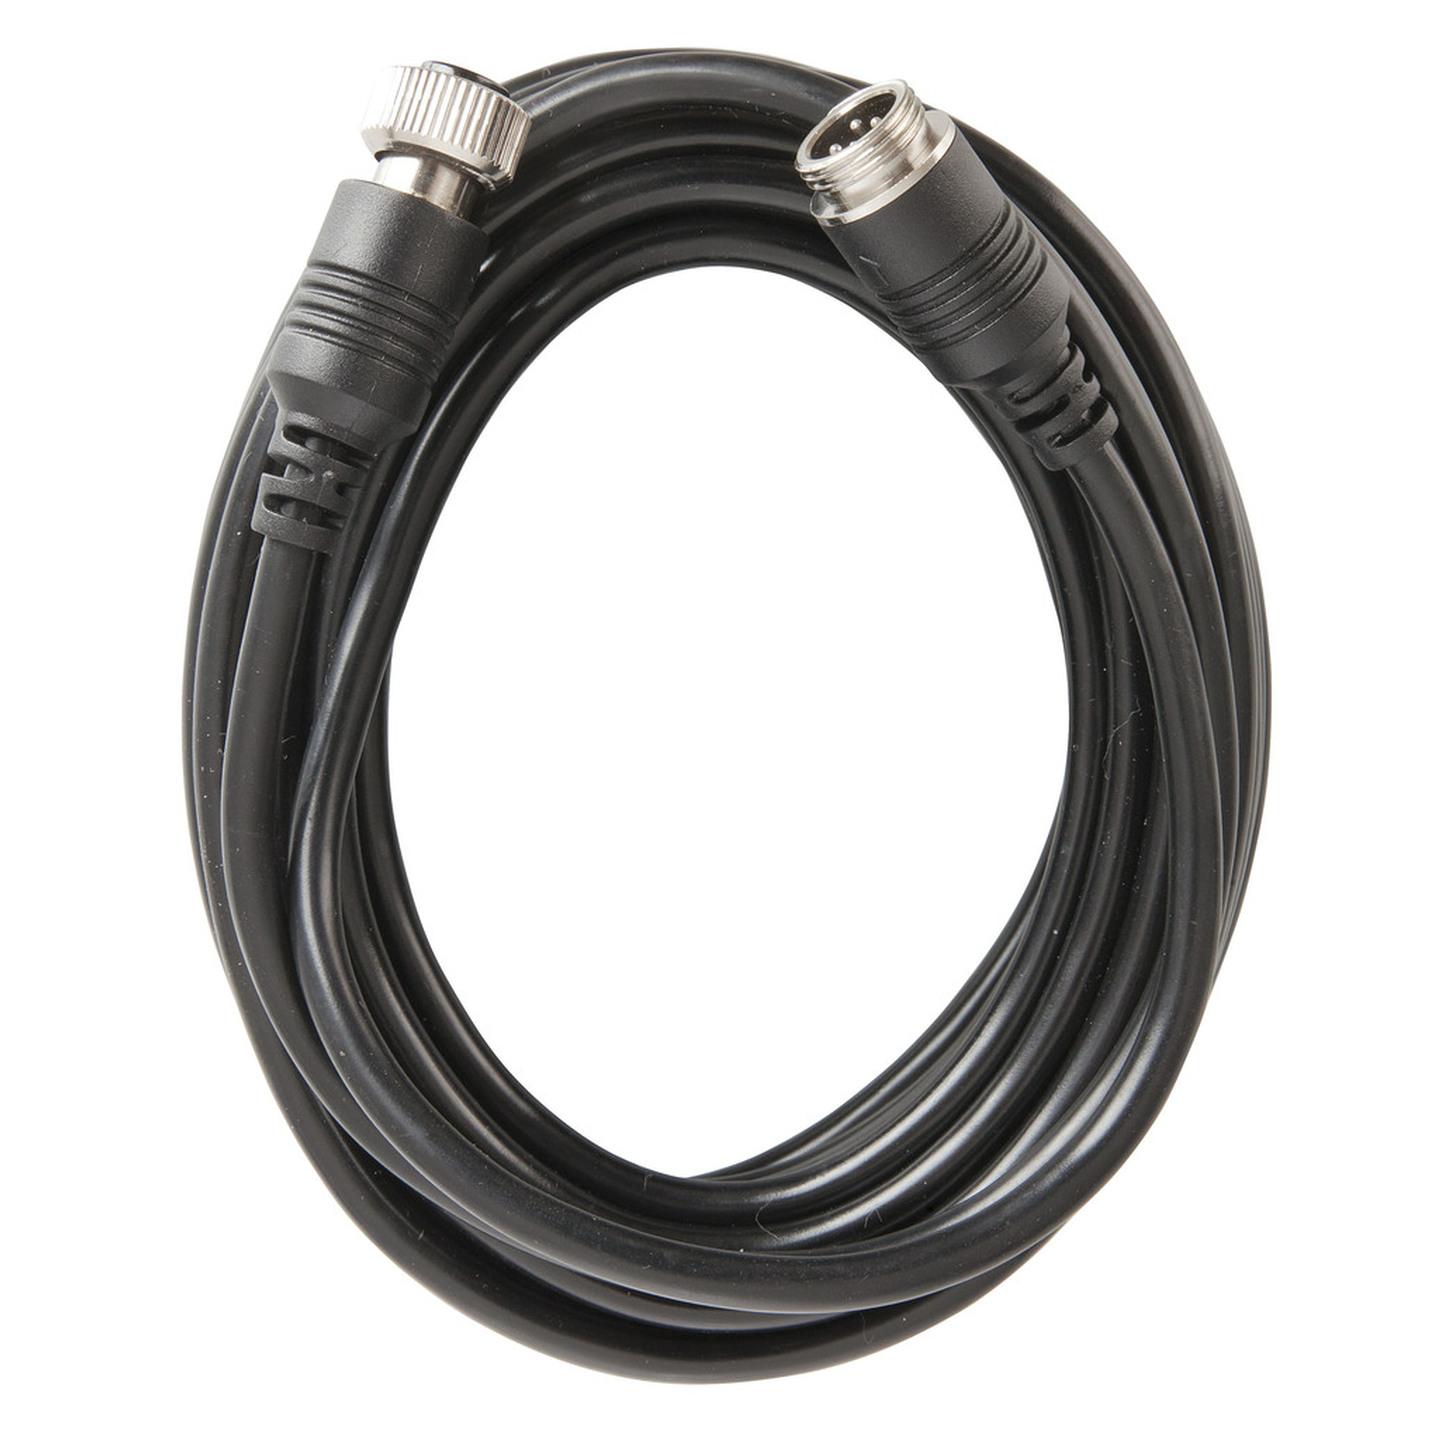 10m Camera Extension Cable for QM3742 Reversing Monitor System